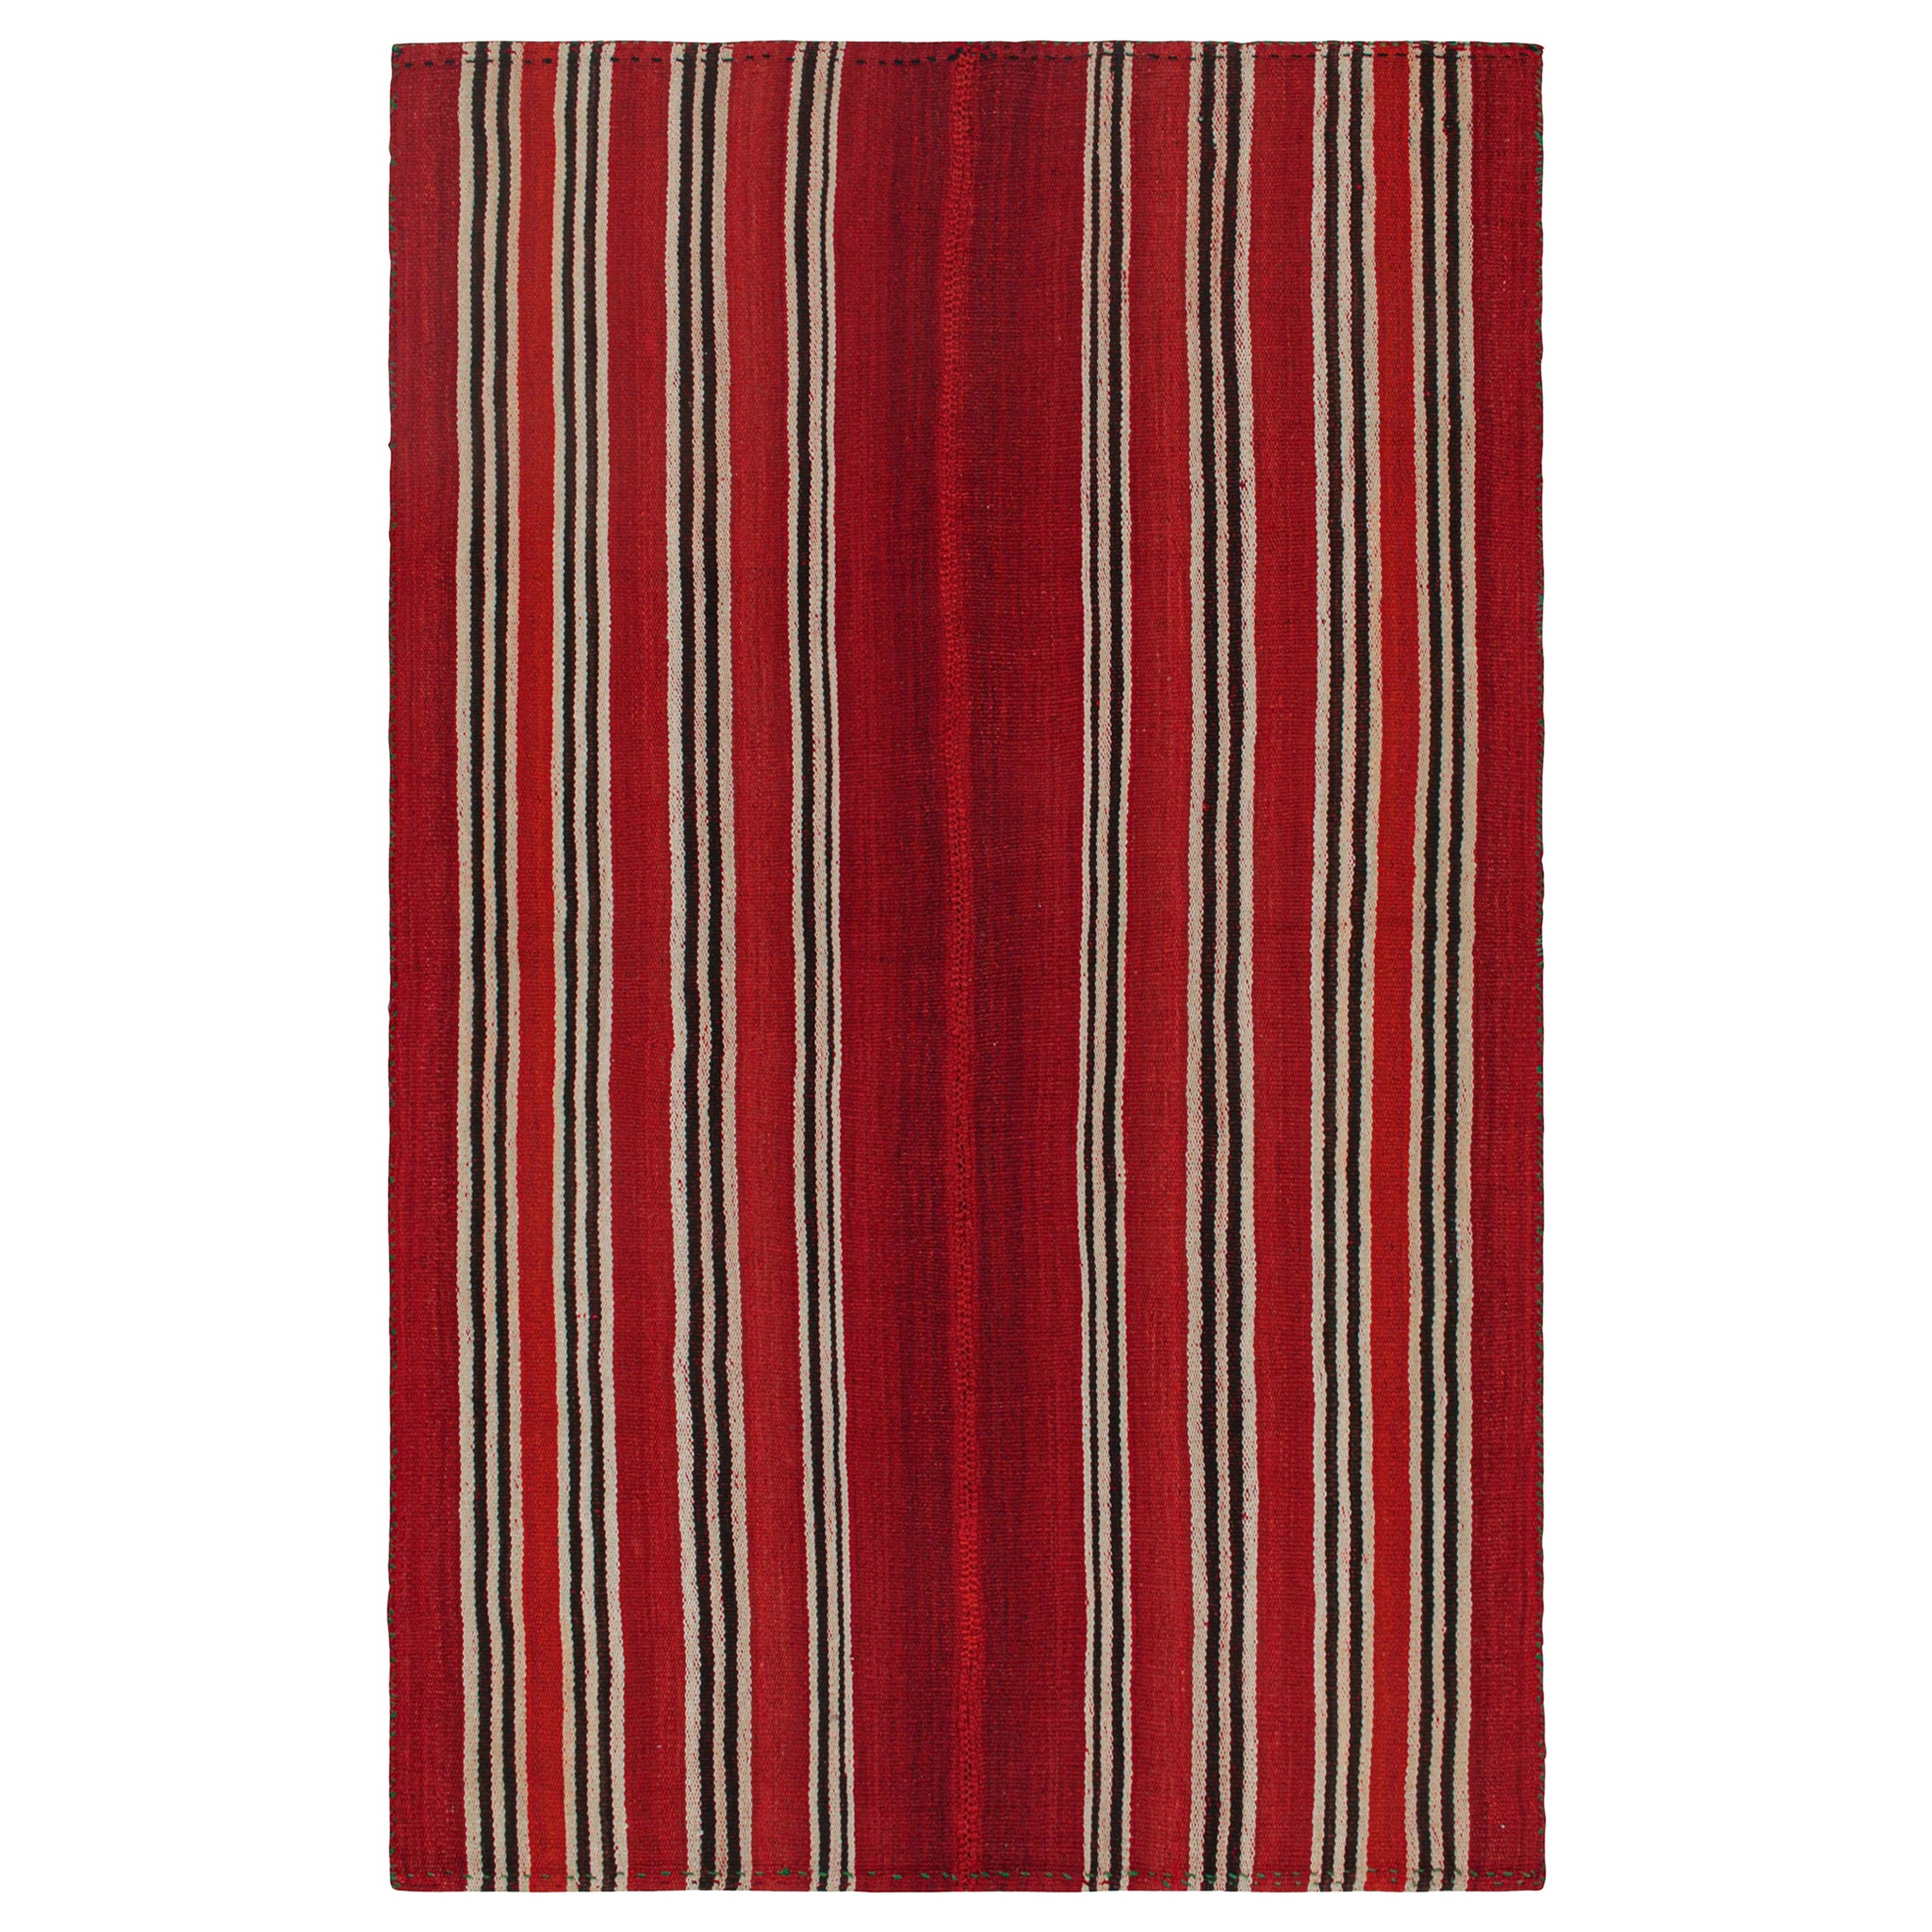 Vintage Persian Kilim with Red, Black and Off-White Stripes by Rug & Kilim